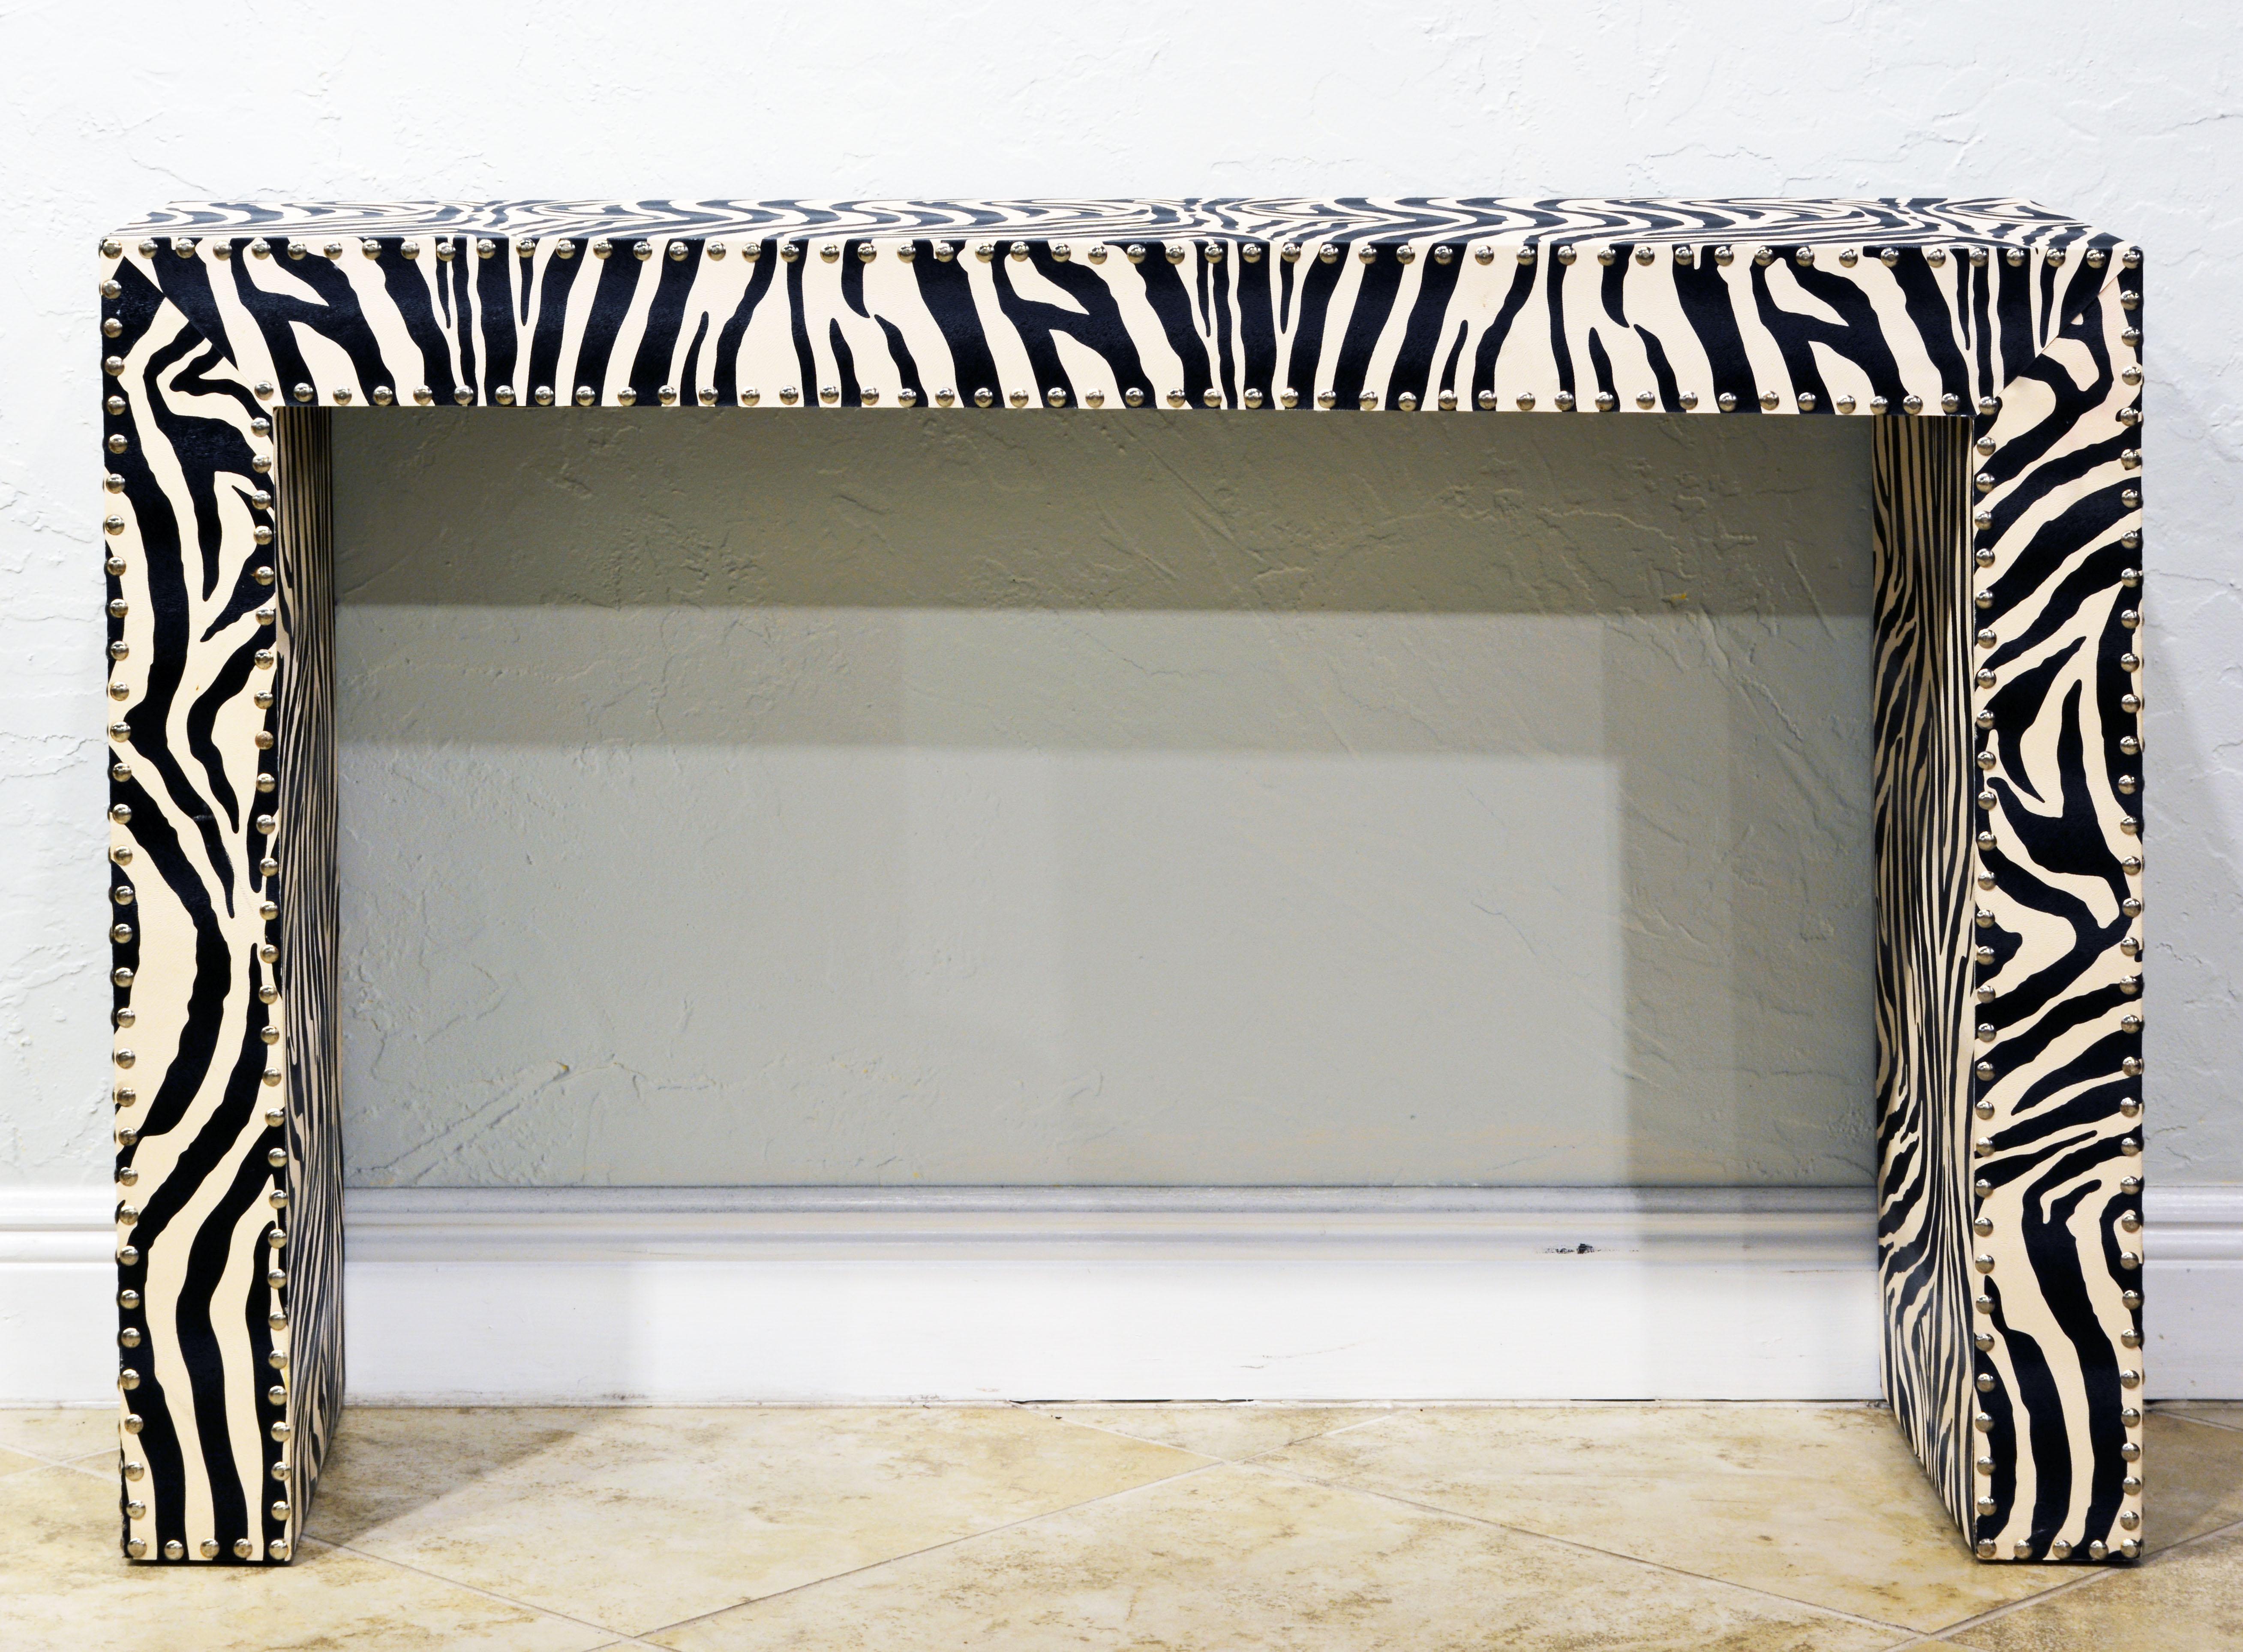 The design and proportions of this vintage Mid-Century Modern console table are strictly modern and Minimalist. It is covered in a spill proof faux zebra print on all sides including the underside and trimmed with shiny chrome nailheads along edges.